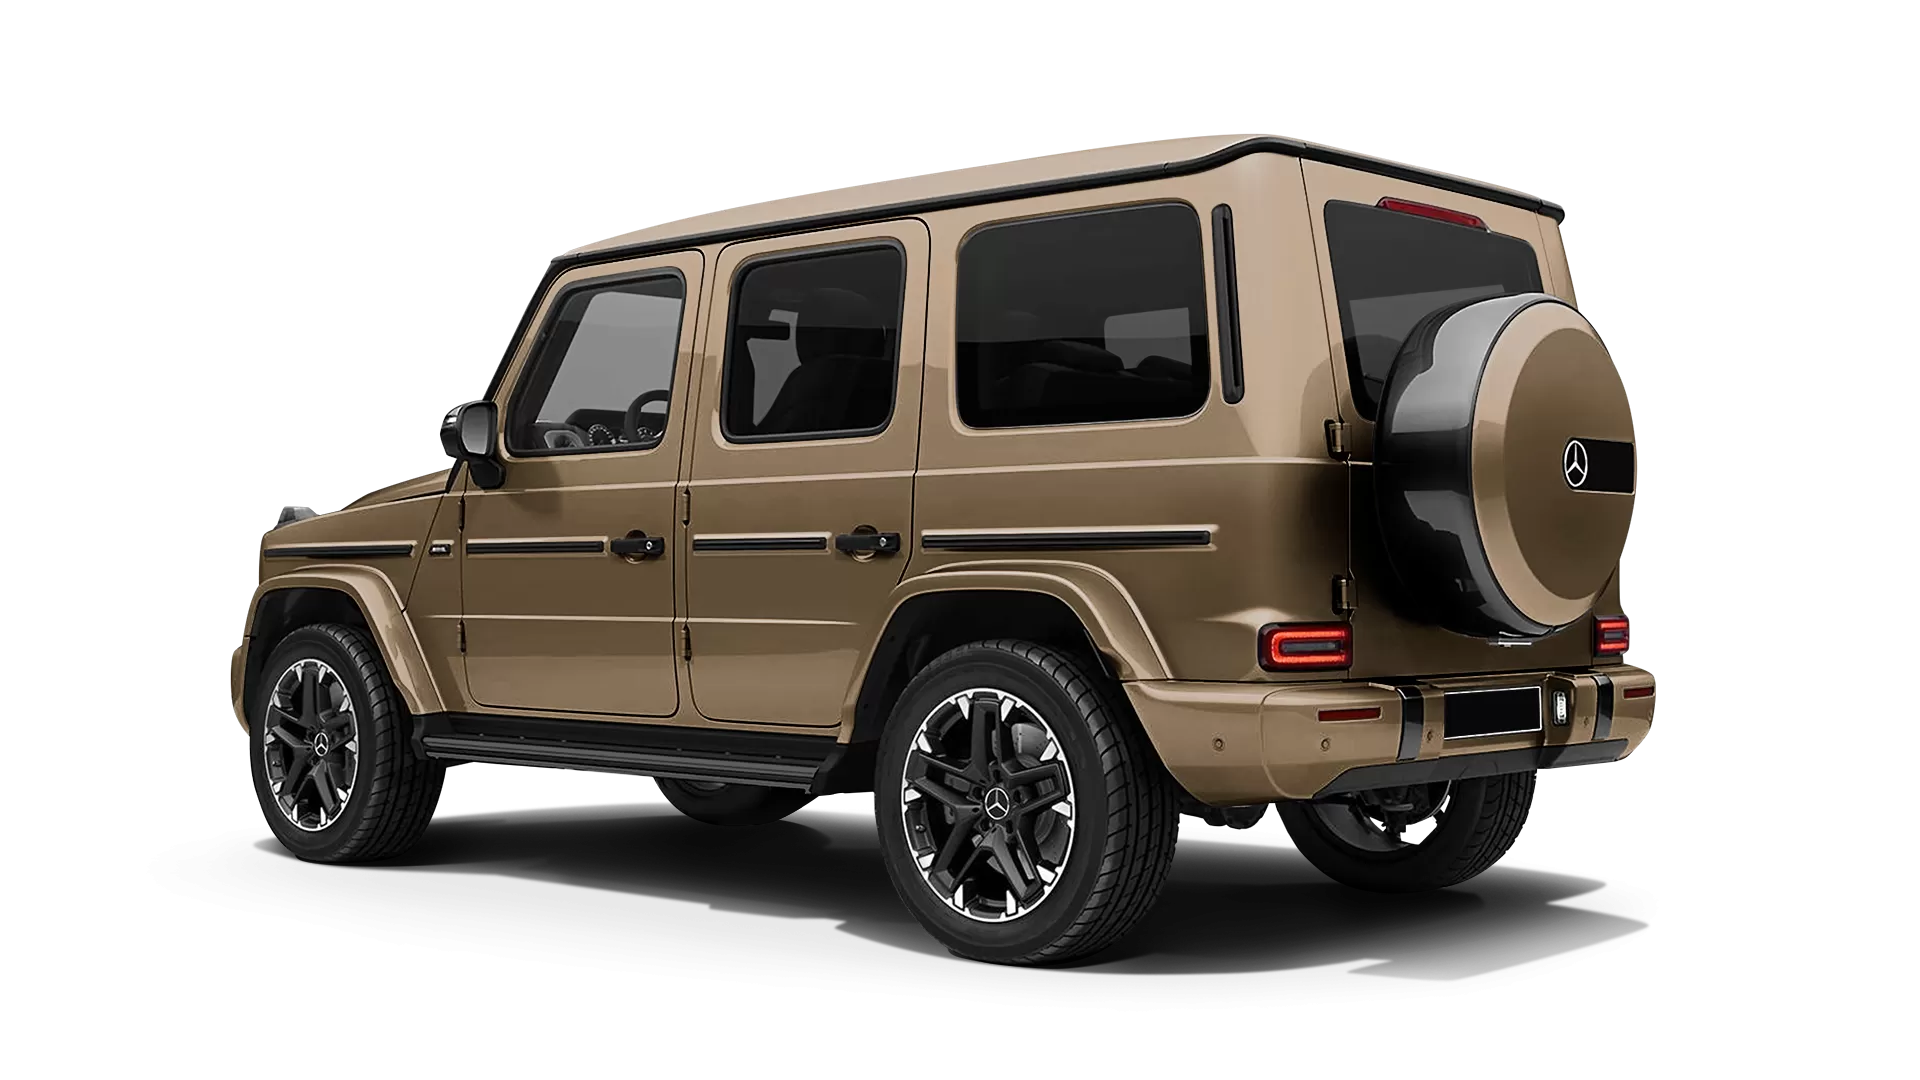 Mercedes G class W463 stock rear view in Desert Sand color